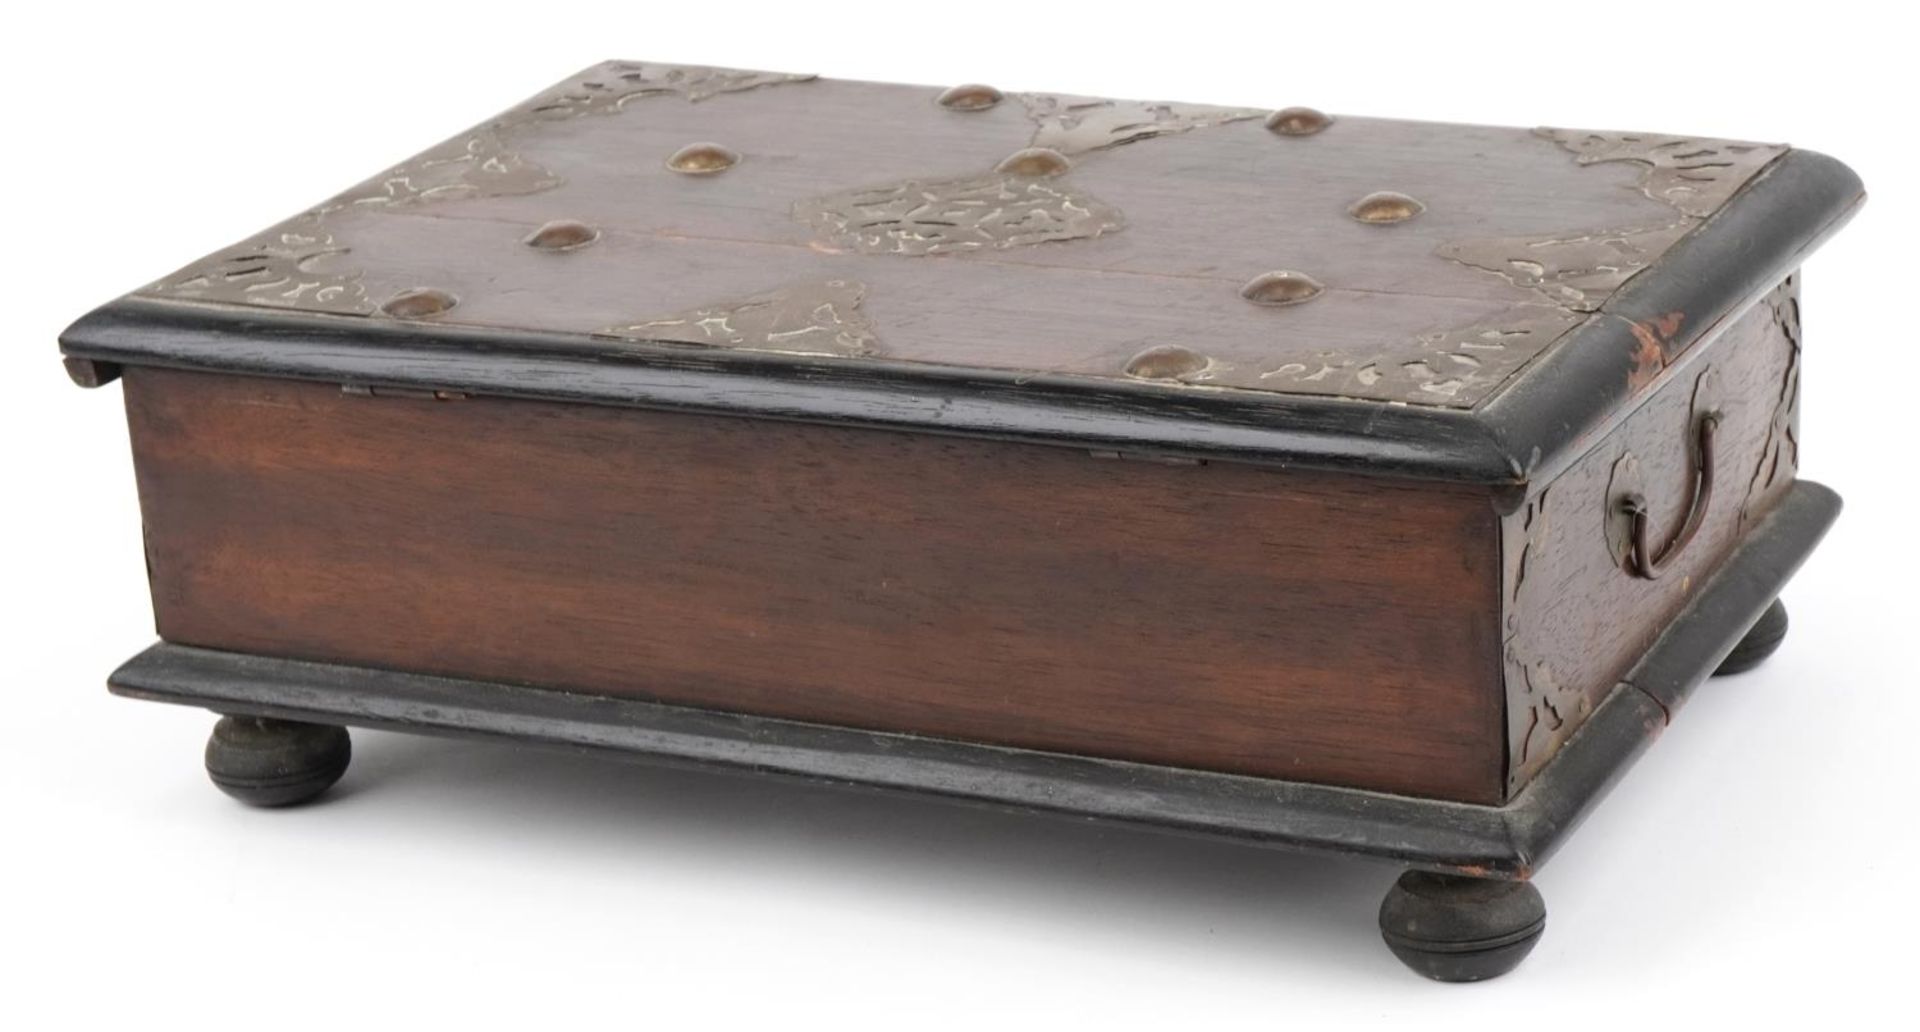 Brass bound oak bible box with twin handles, 16cm H x 44cm W x 27.5cm D : For further information on - Image 3 of 4